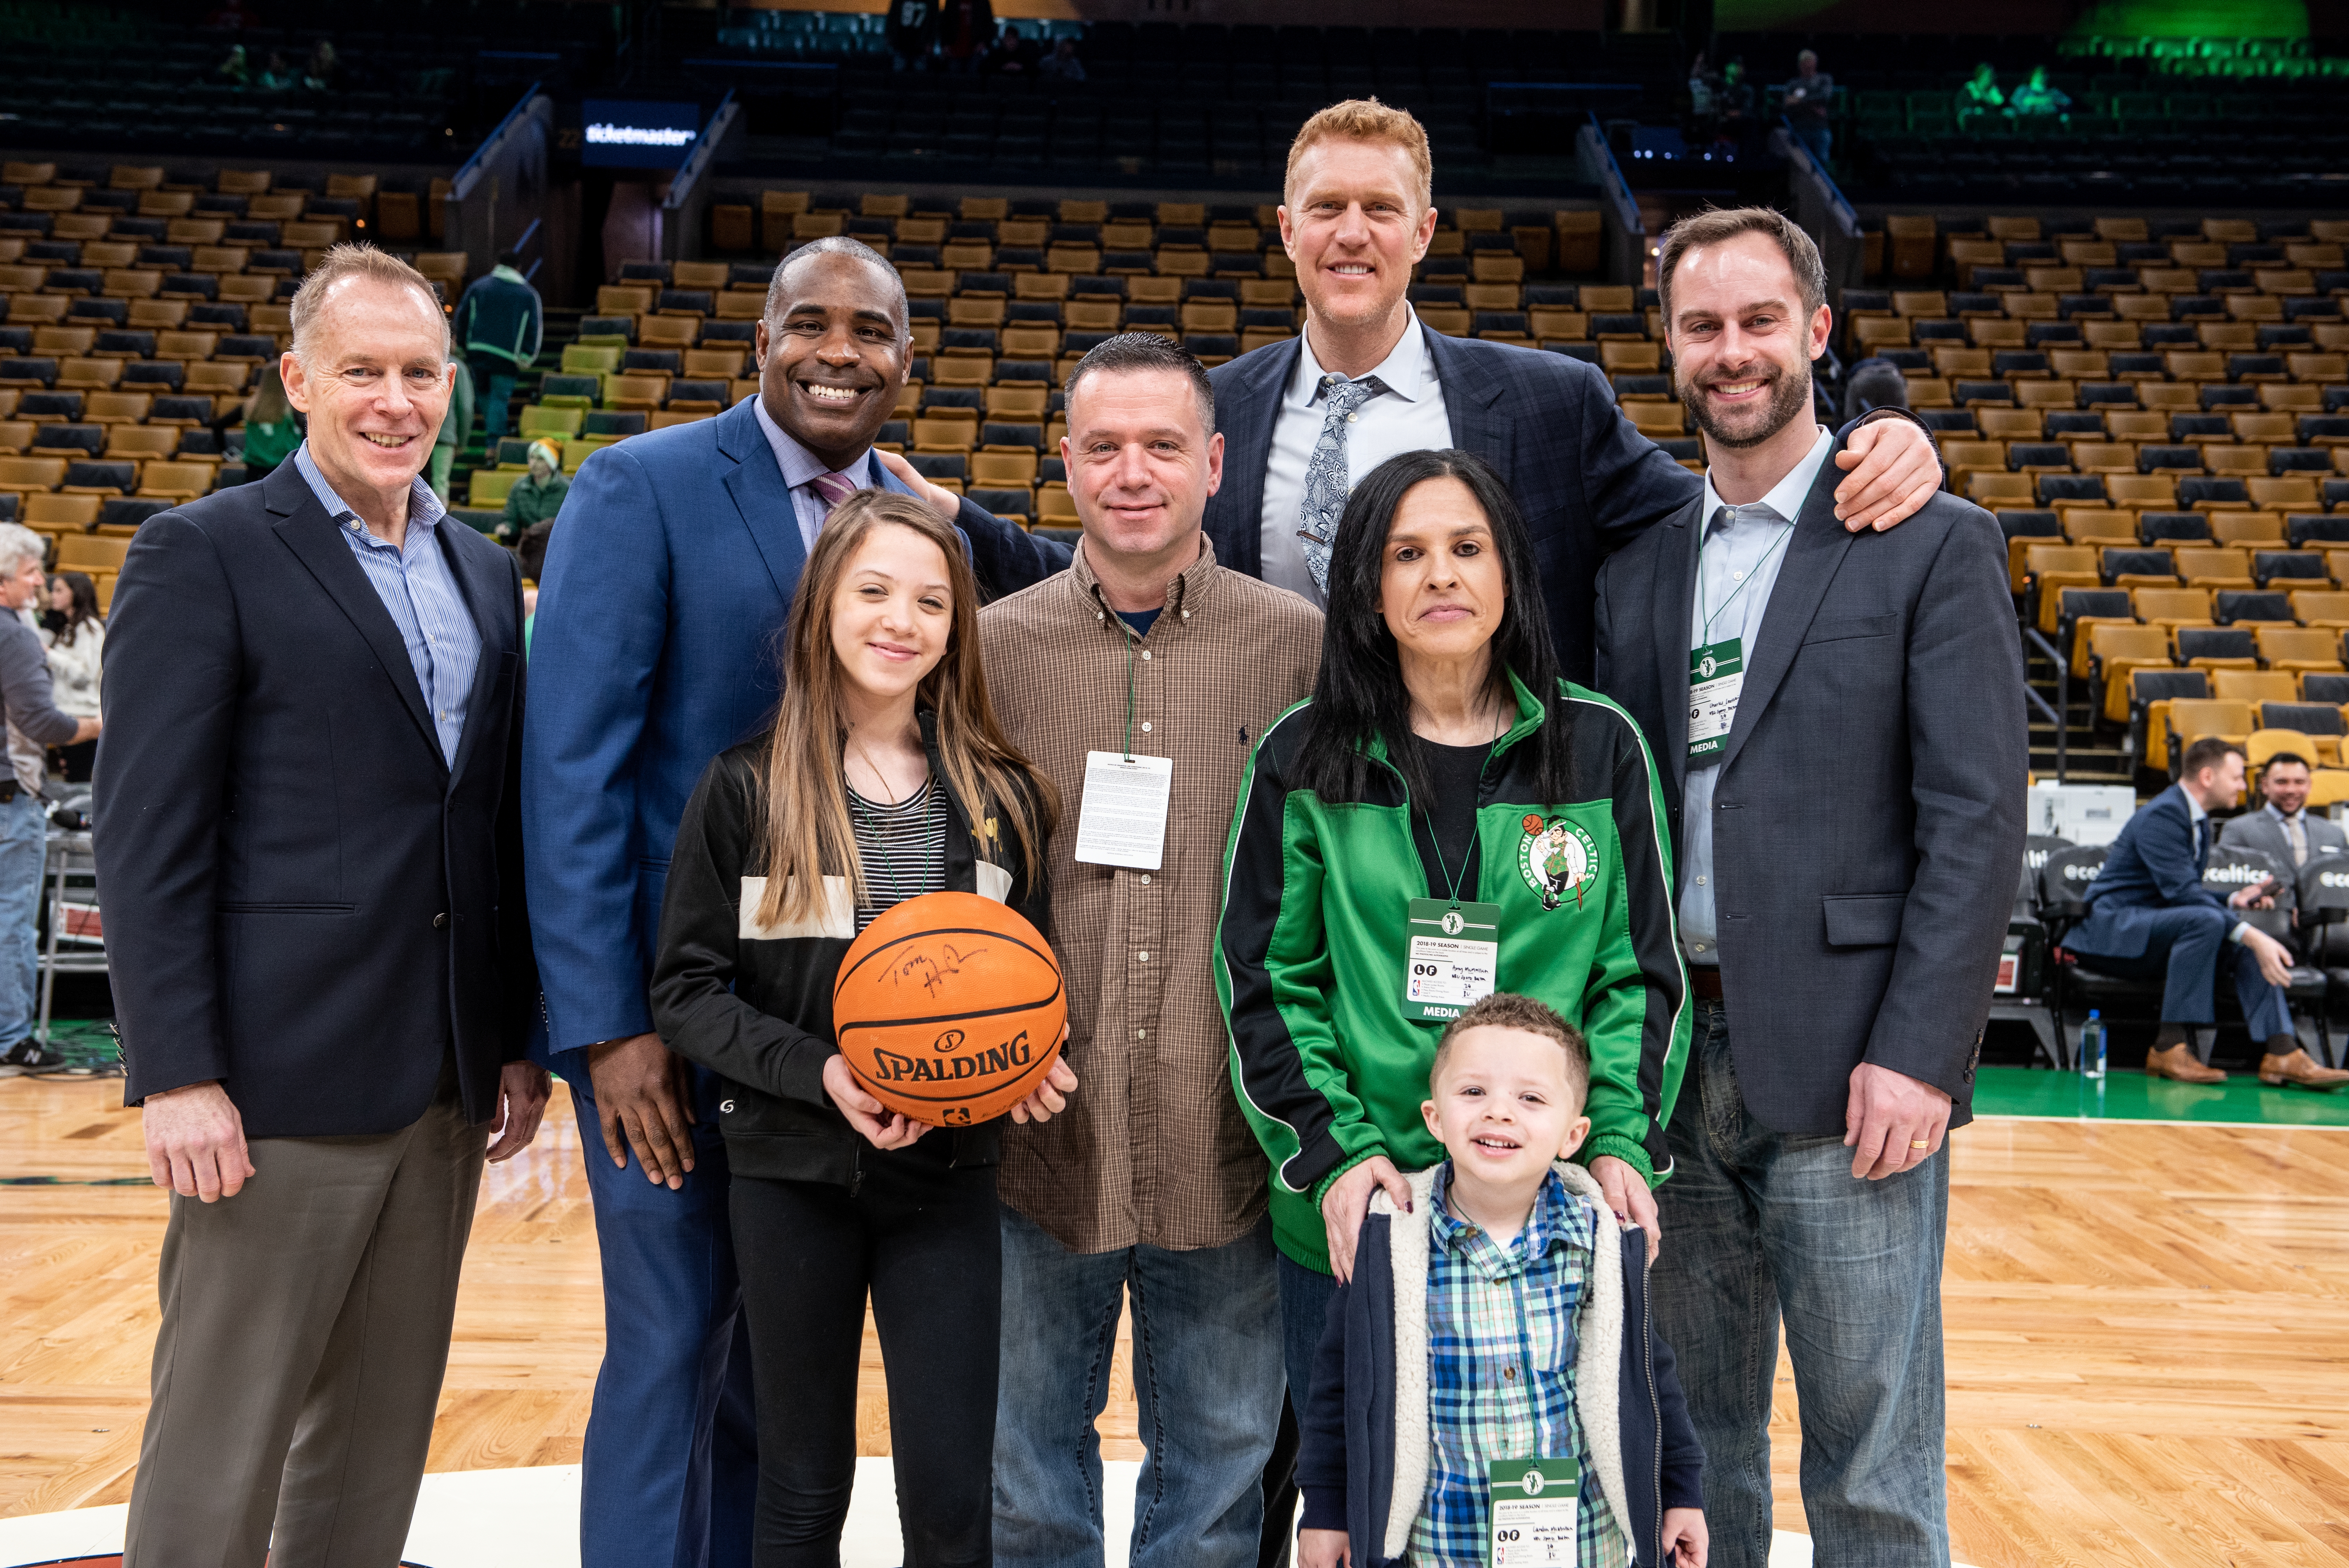  Children’s Hospital patient Allie McMullen honored at Boston Celtics' Amica Game Ball Program event